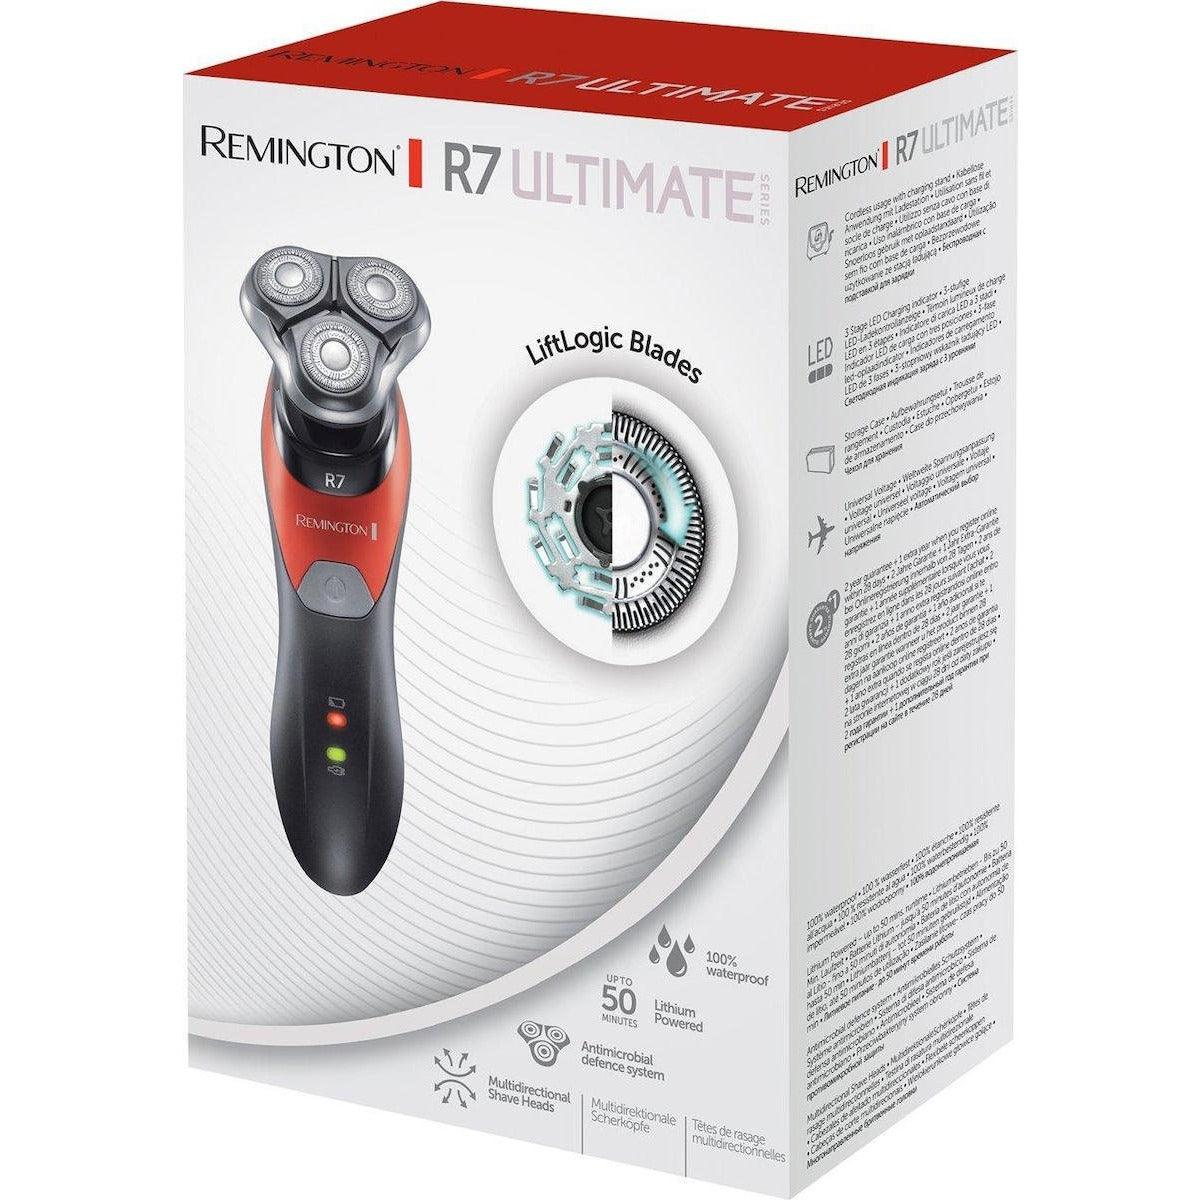 Remington Ultimate Series Rotary Electric Shaver - Black | XR1530 R7 from DID Electrical - guaranteed Irish, guaranteed quality service. (6890790092988)